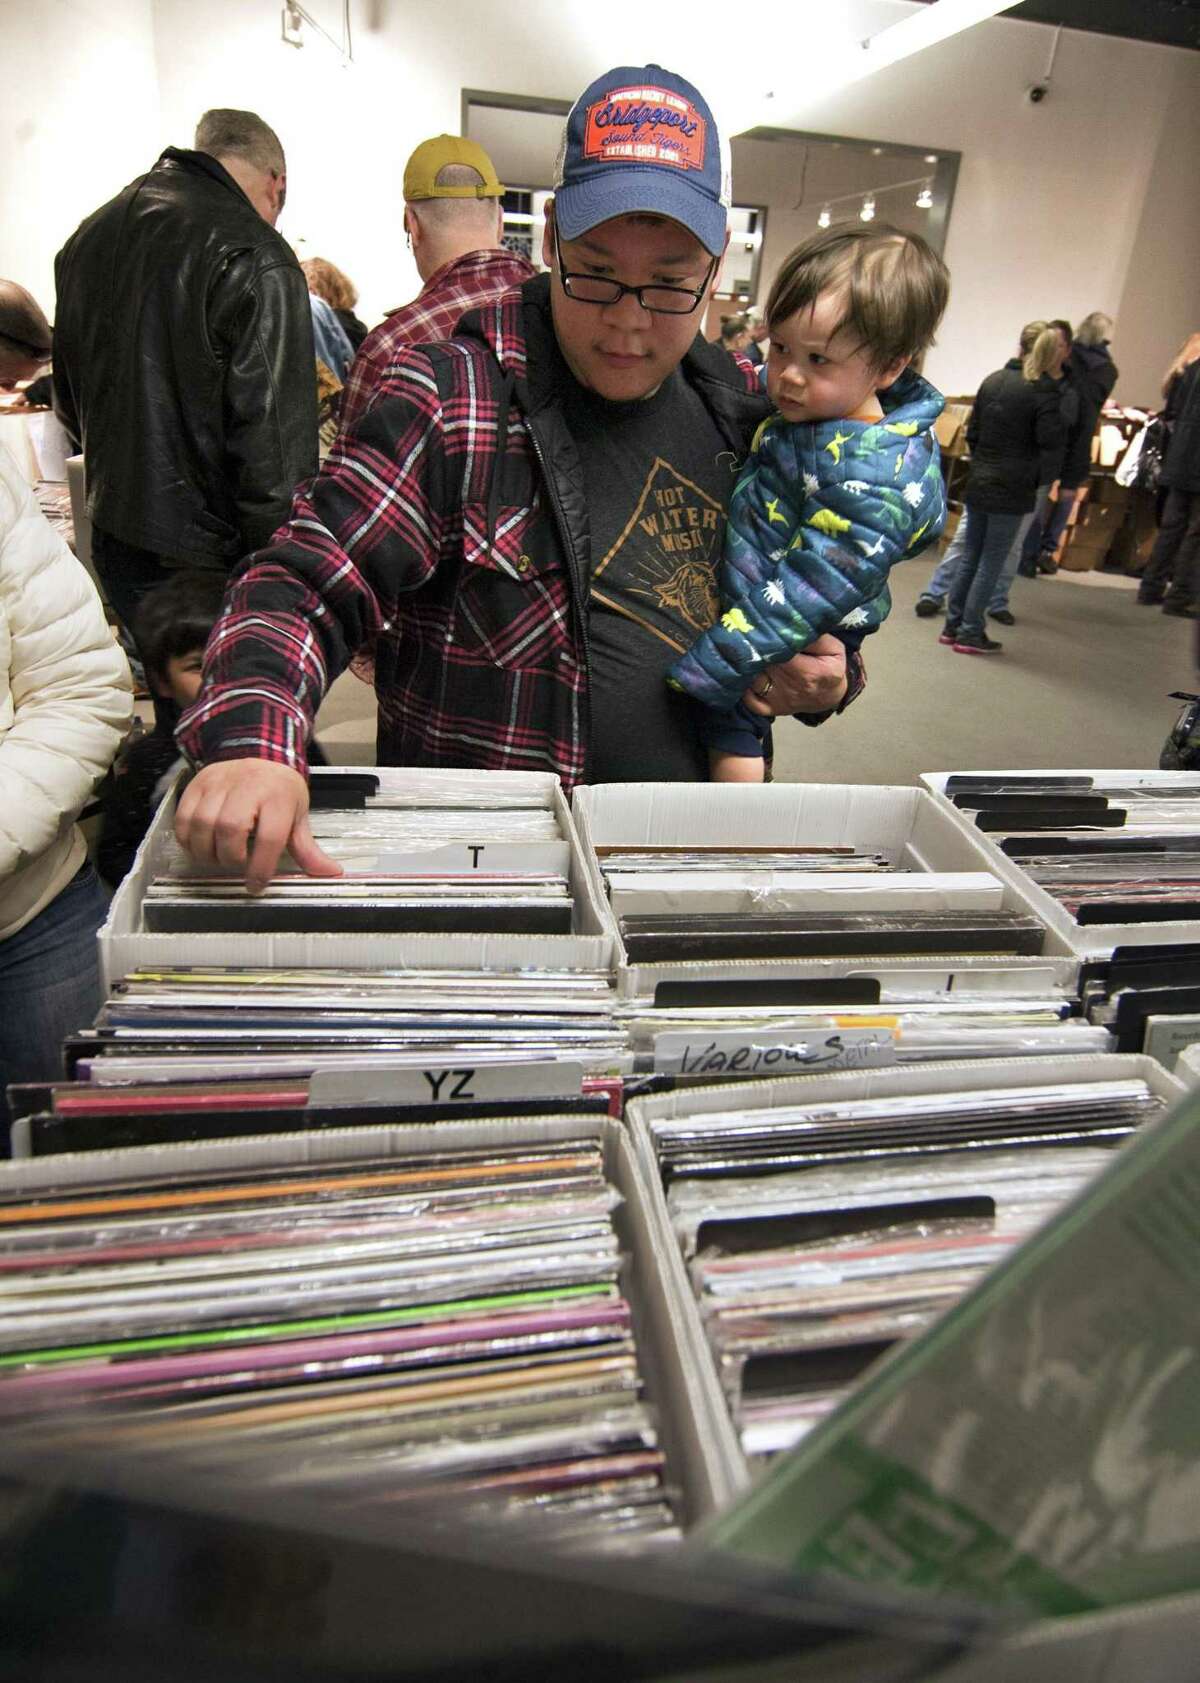 Doug Eng, of Trumbull, looks through boxes of records as he holds his son Arlan, 1, during WPKN's MUSIC MASH Record Fair 2018 at Read's Artspace building on Broad Street in Bridgeport, Conn., on Saturday, Mar. 3, 2018. MUSIC MASH 2018 featured 50+ vendors from all over New England selling vinyl LP's, 45's, CD's and music collectibles.